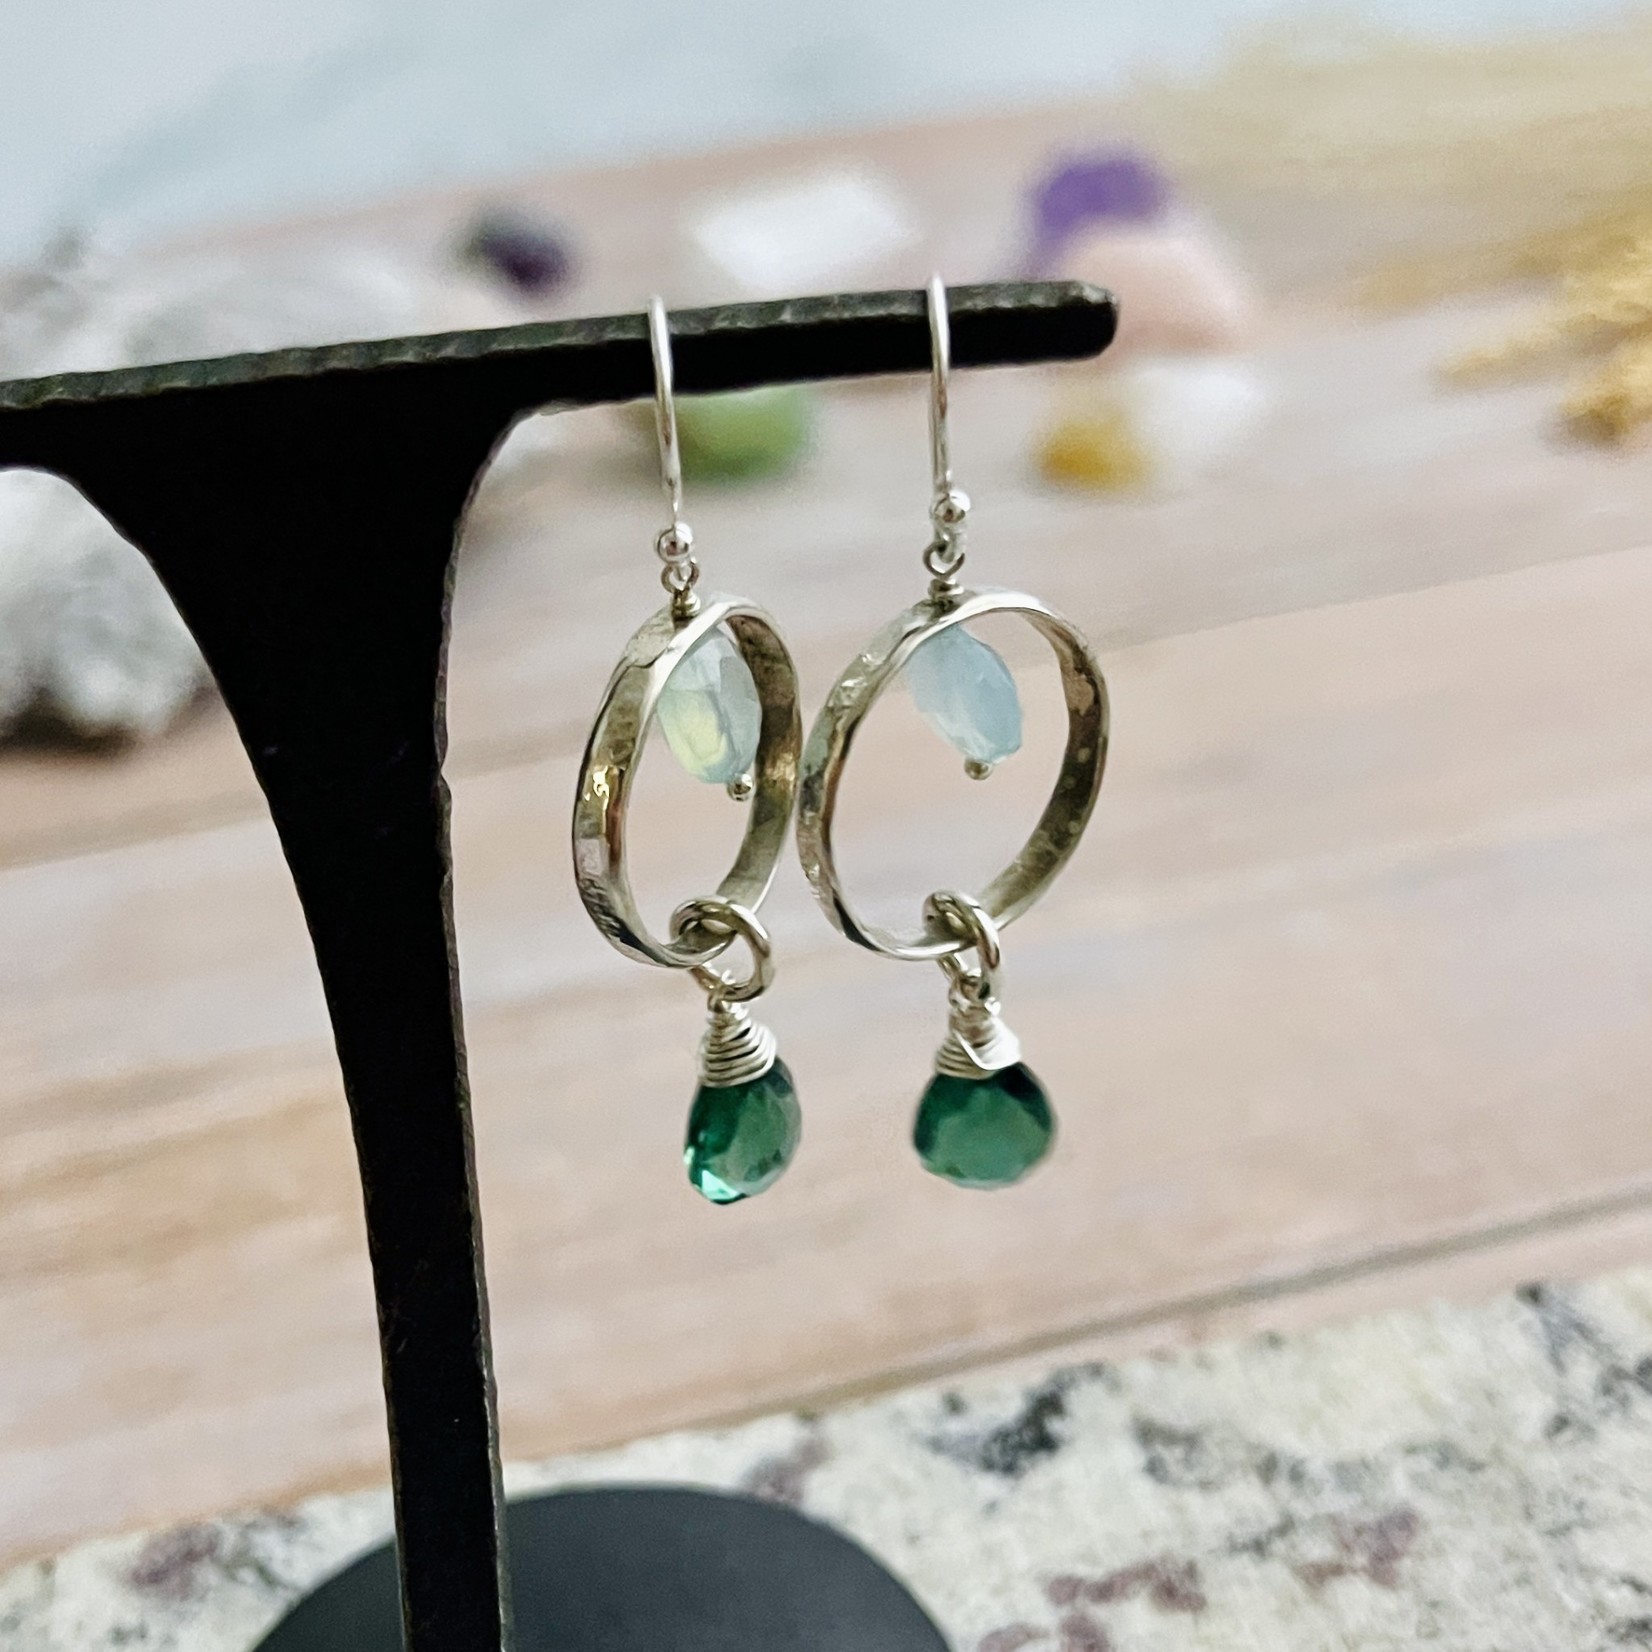 Handmade Silver Earrings with peruvian chalcedony coin, hammered ring, green hydro briolette